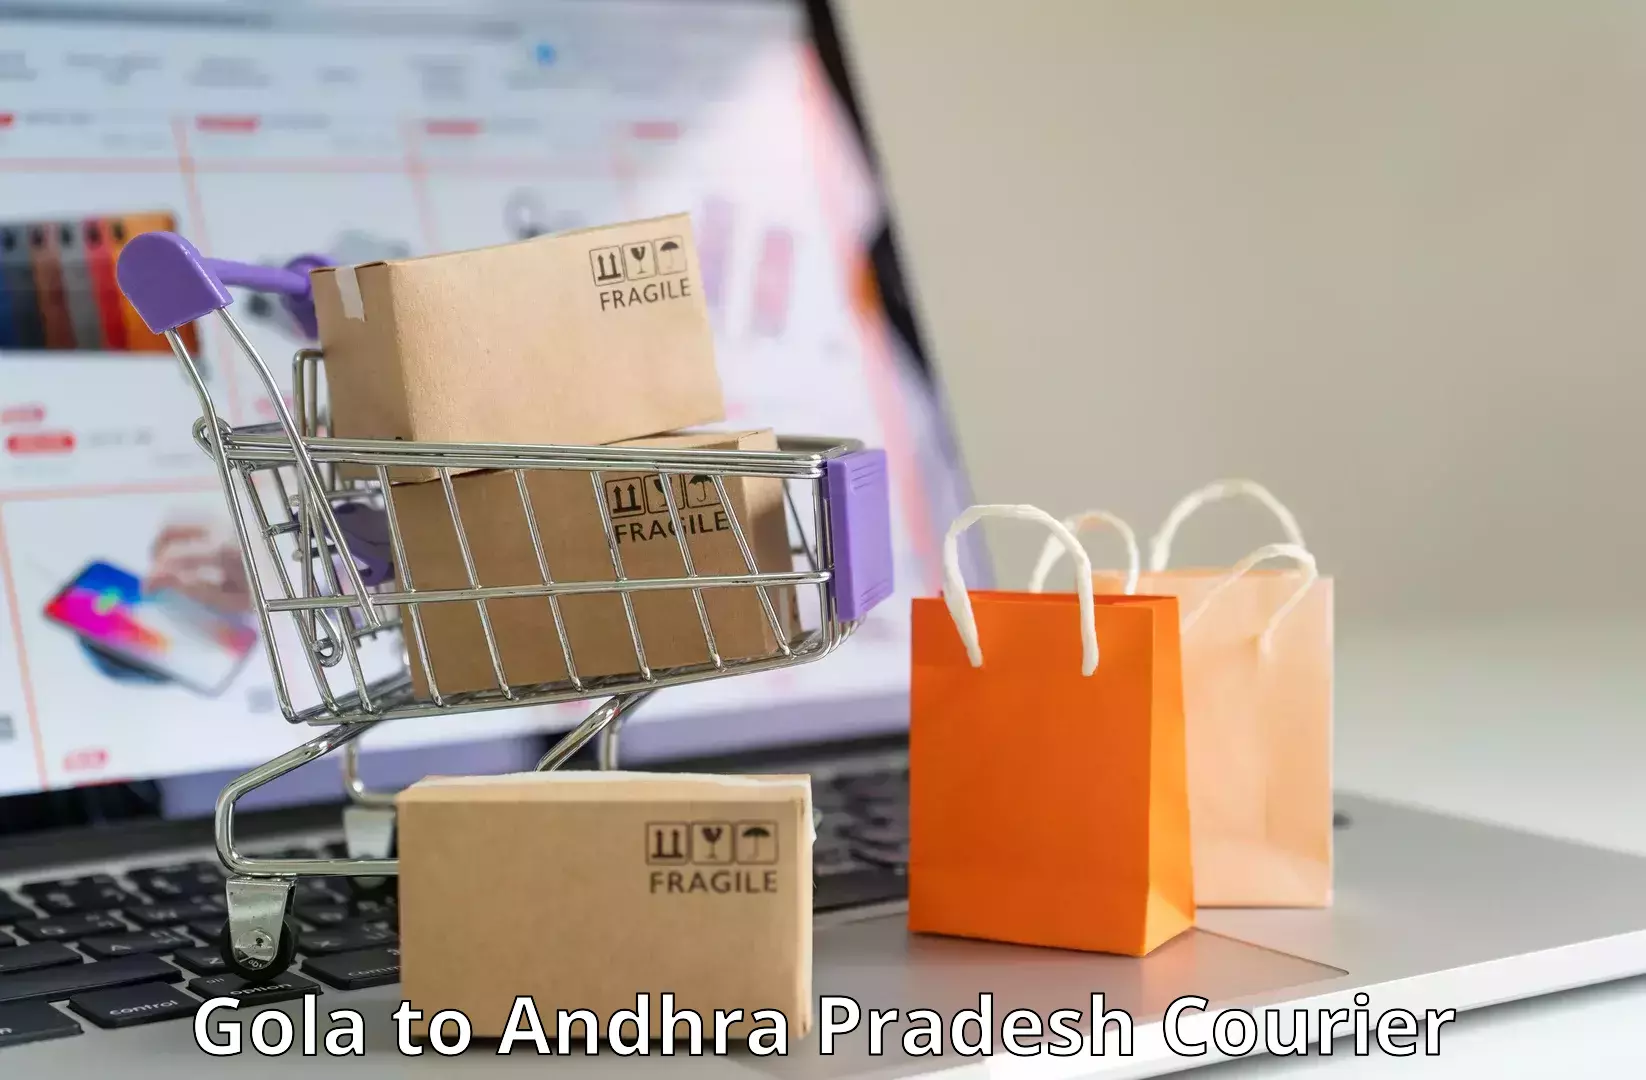 Courier service booking in Gola to Chintapalli